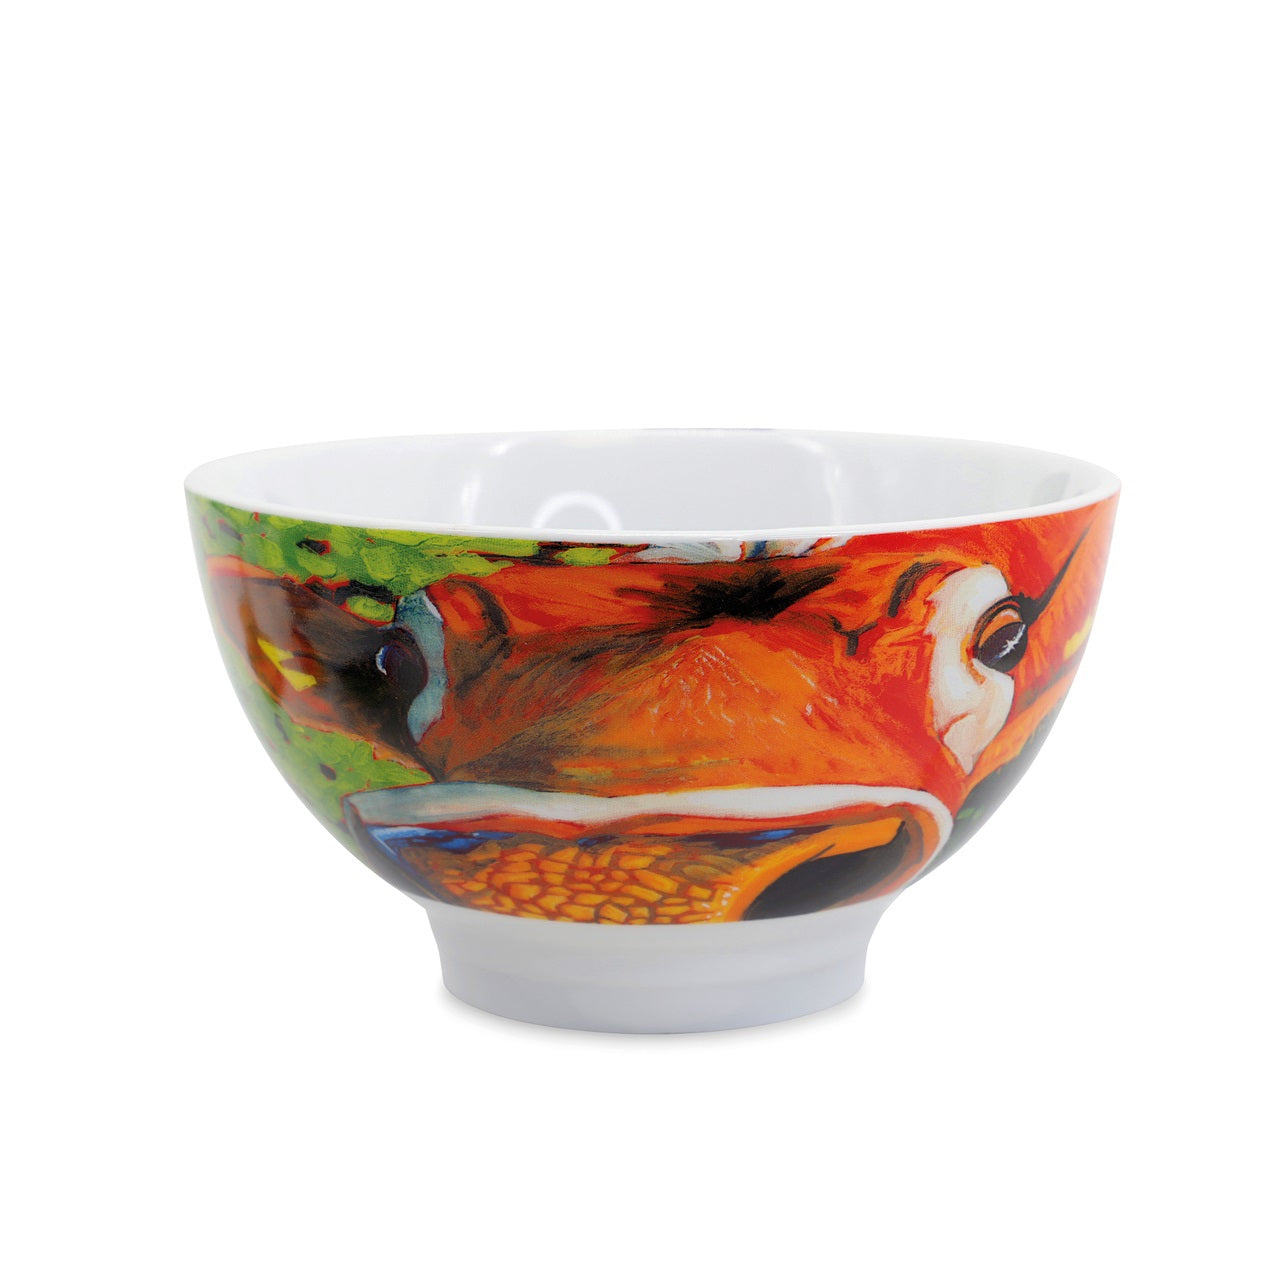 Eoin O'Connor Set of 4 Bowls - NEW 2021  Tipperary Crystal in association with Irish Artist Eoin O Connor are delighted to present you our new Cafe Range. These high quality designs come wonderfully presented in funky rigid gift boxes